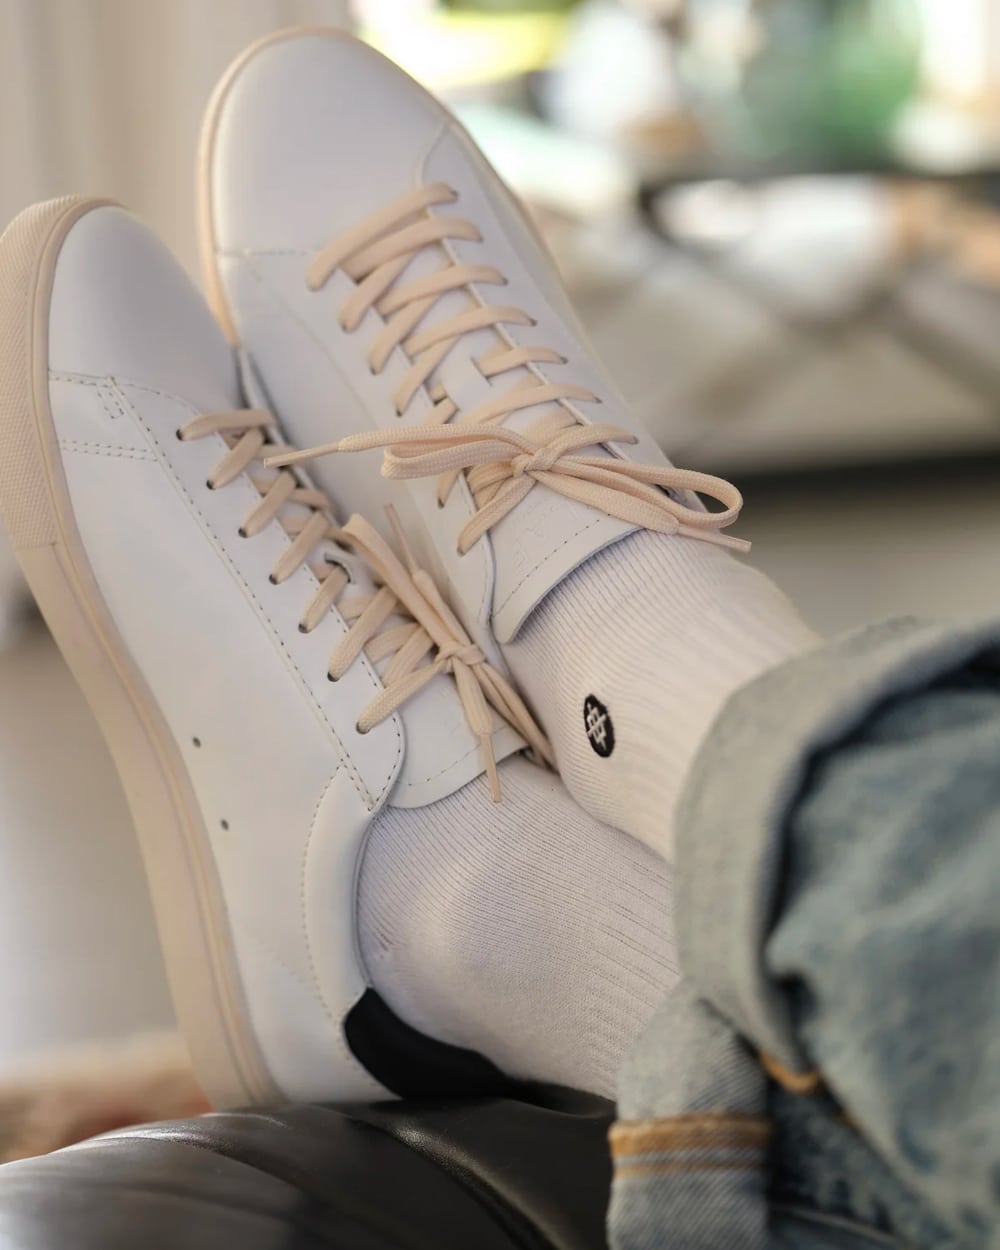 Pair of white leather CLAE sneakers with off-white outsole and laces worn on feet with white socks and light wash jeans